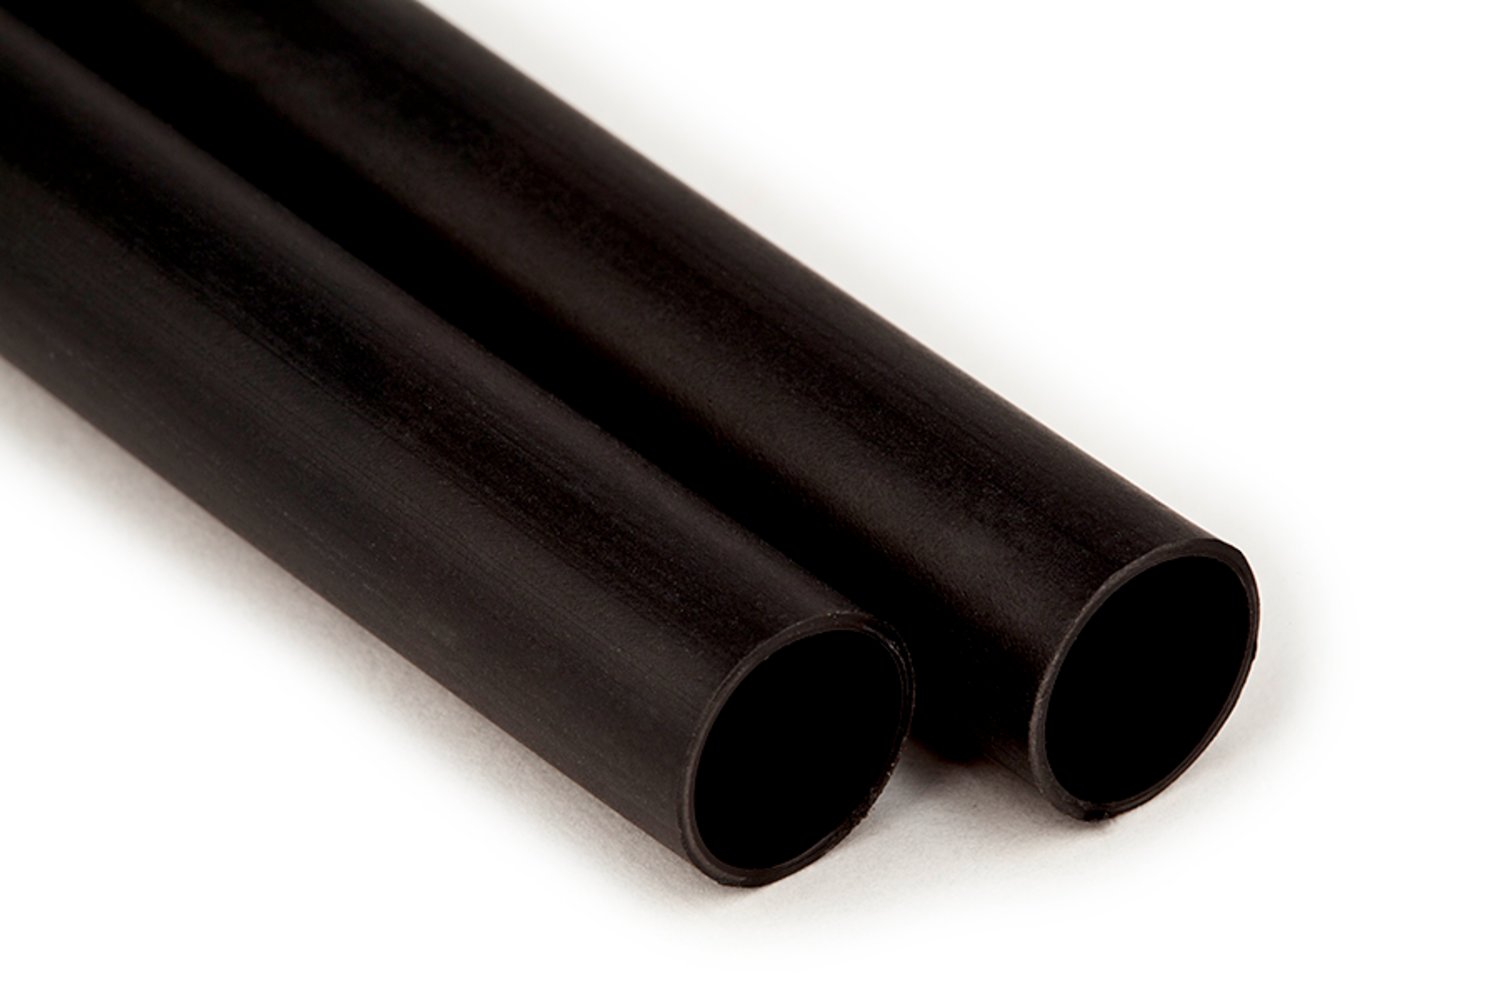 7000133625 - 3M Heat Shrink Multiple-Wall Polyolefin Tubing
EPS400-.300-48"-Black-125 Pcs, 48 in length sticks, 125 pieces/case